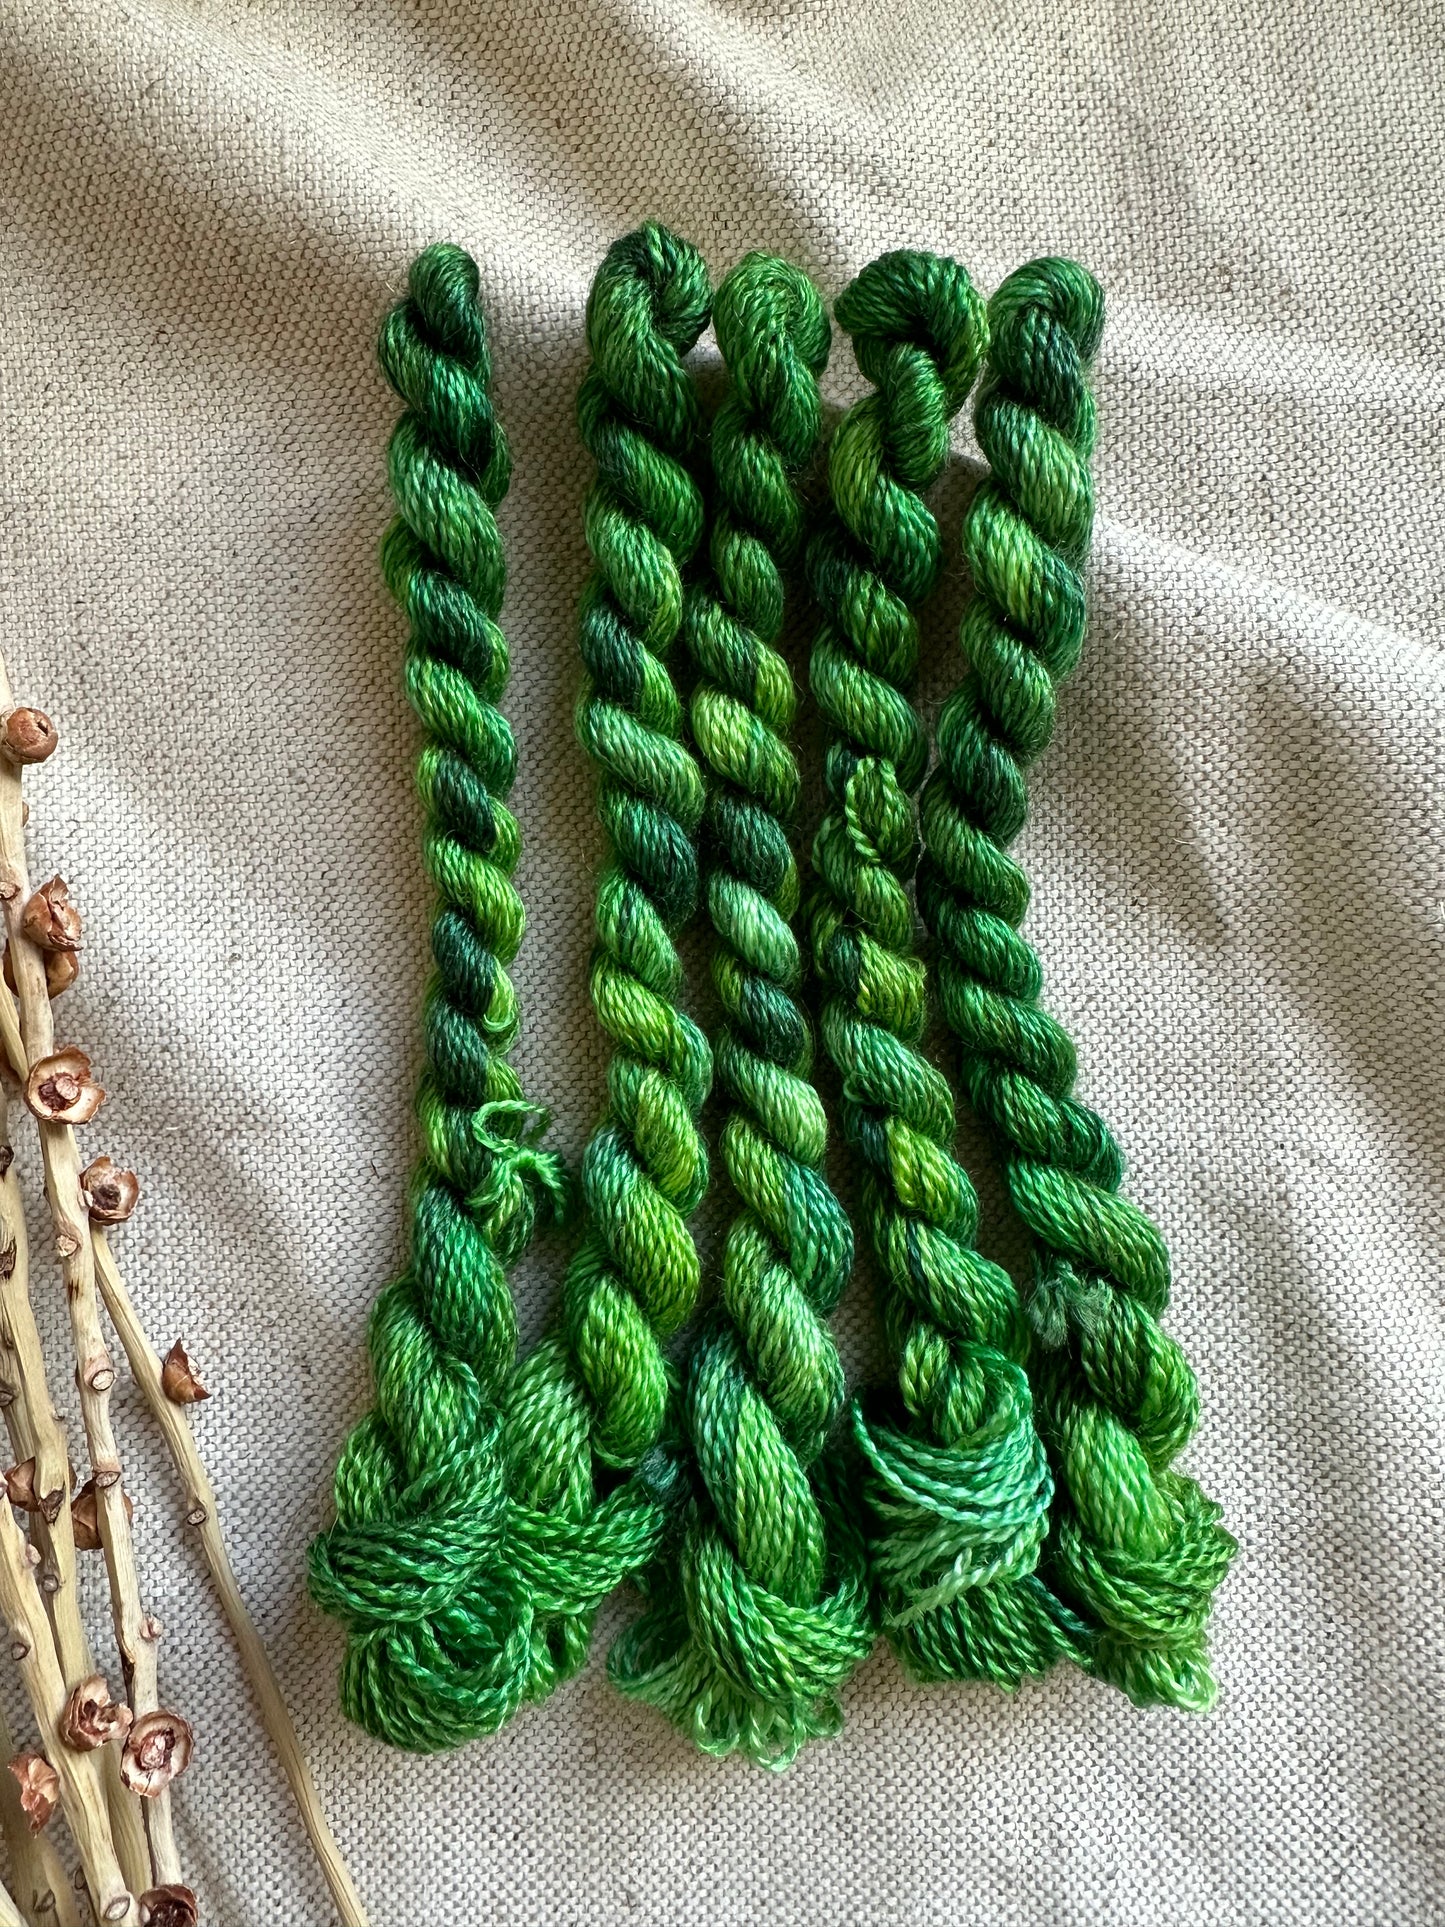 Shades of Green Embroidery Thread